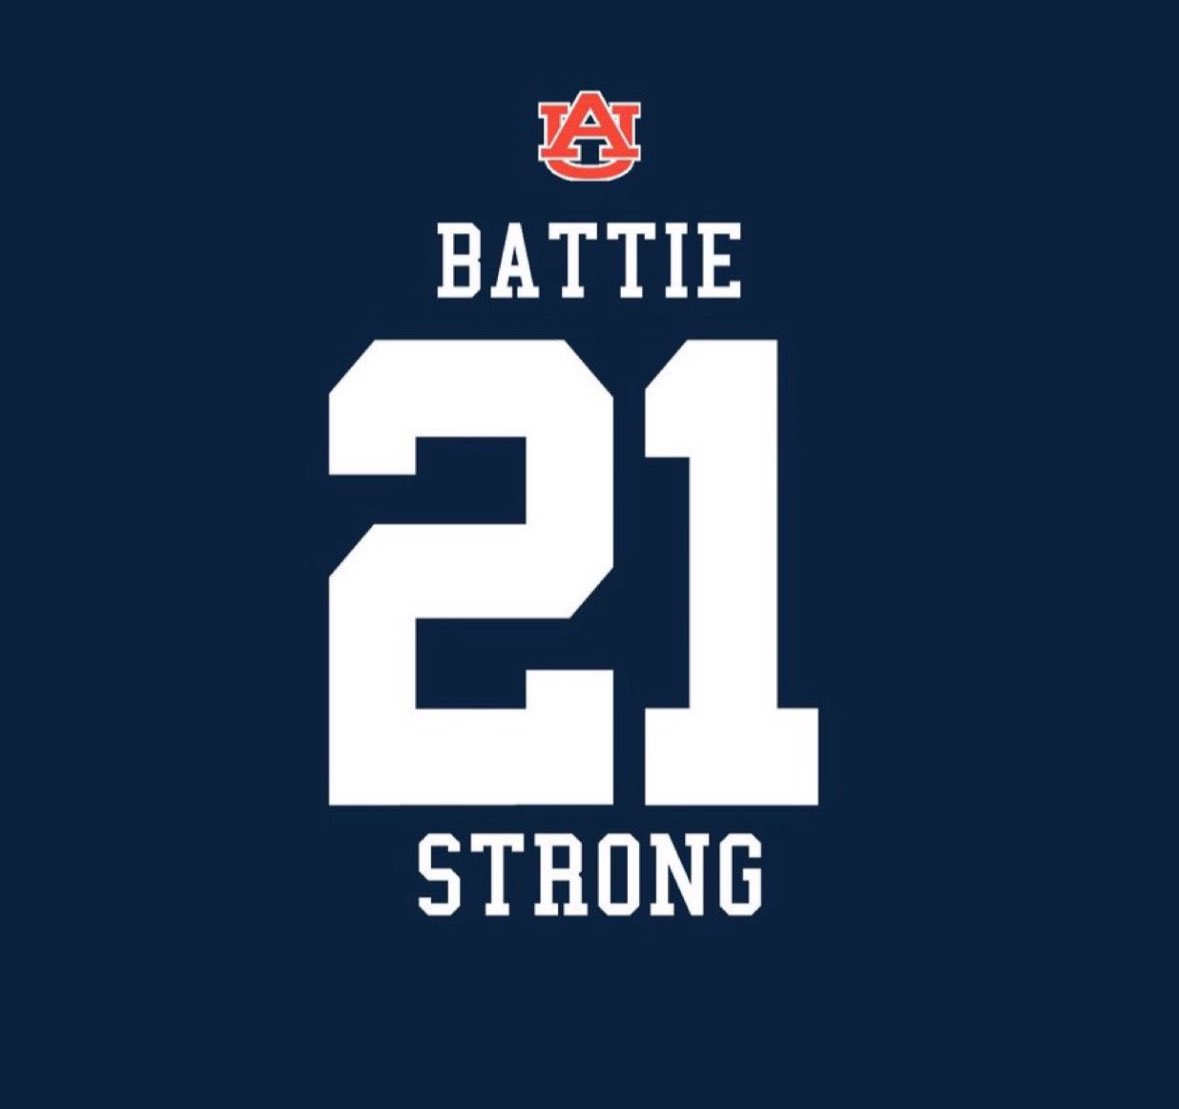 Auburn Family lets pray for Brian and his family 🙏🏿 #BattieStrong